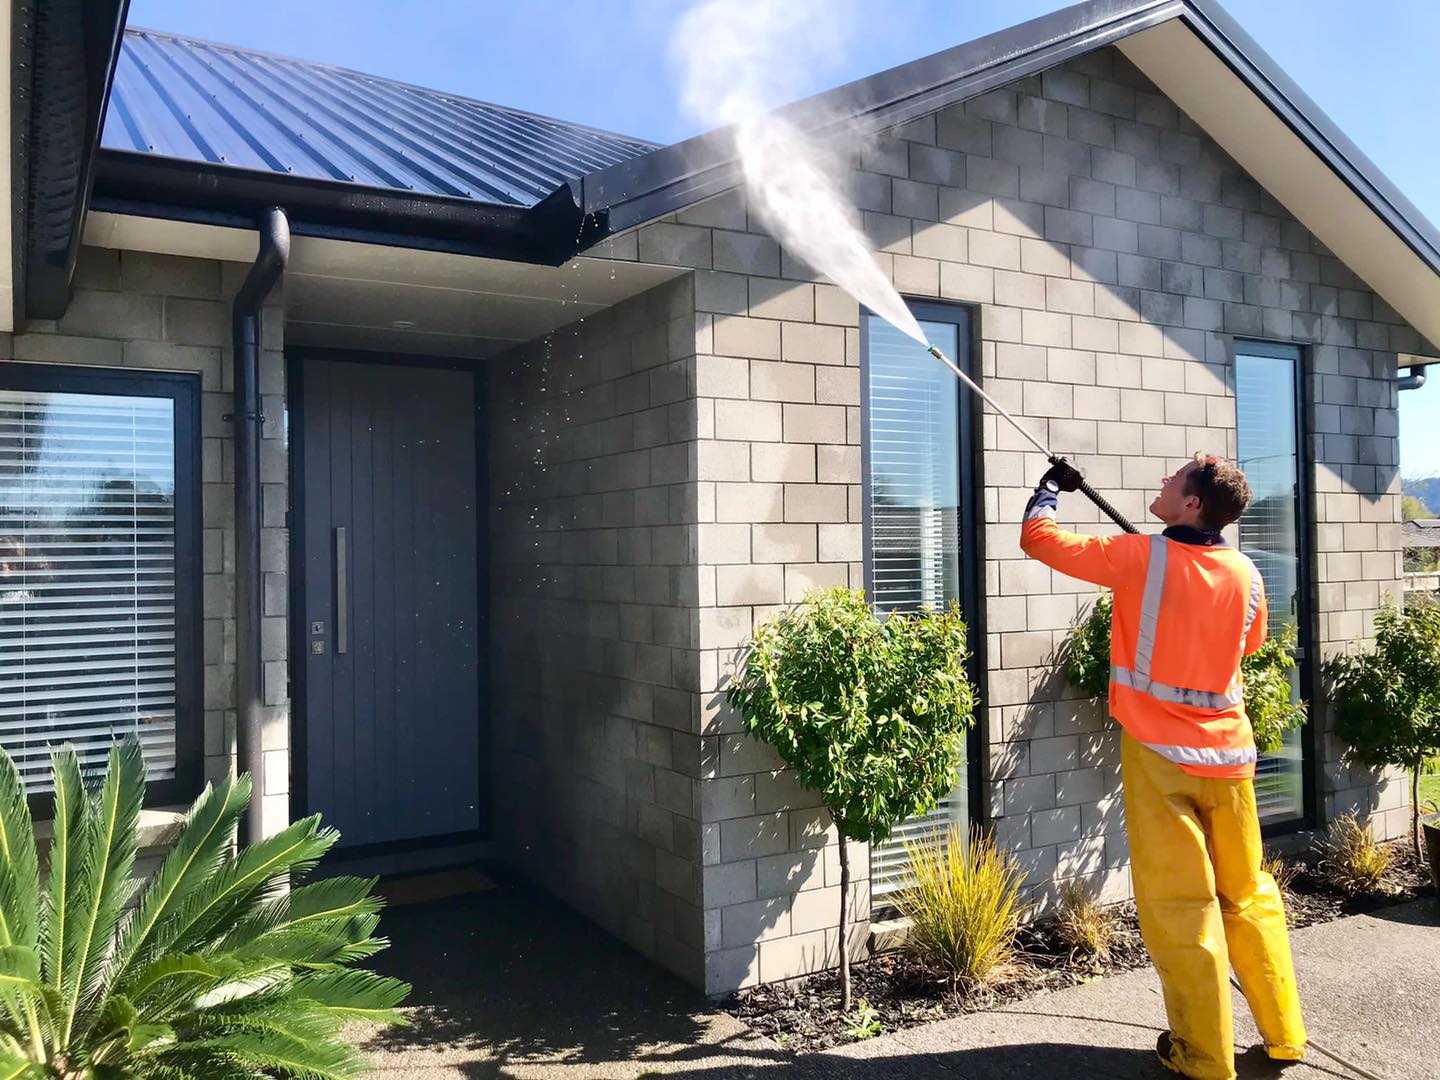 house washing specialist cleaning a house exterior